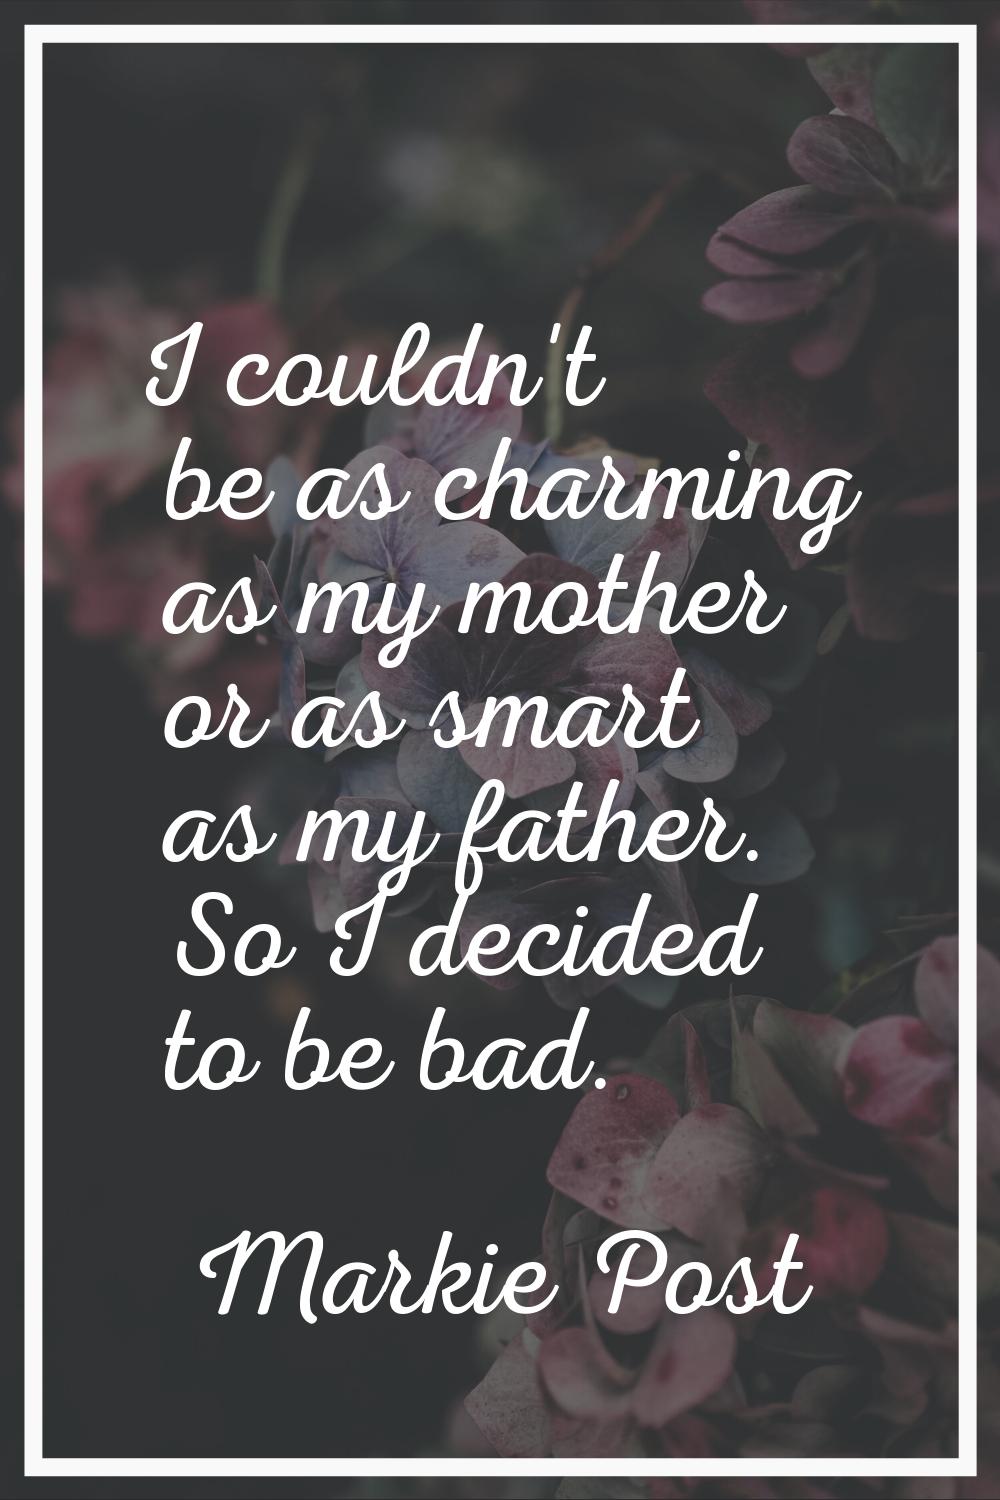 I couldn't be as charming as my mother or as smart as my father. So I decided to be bad.